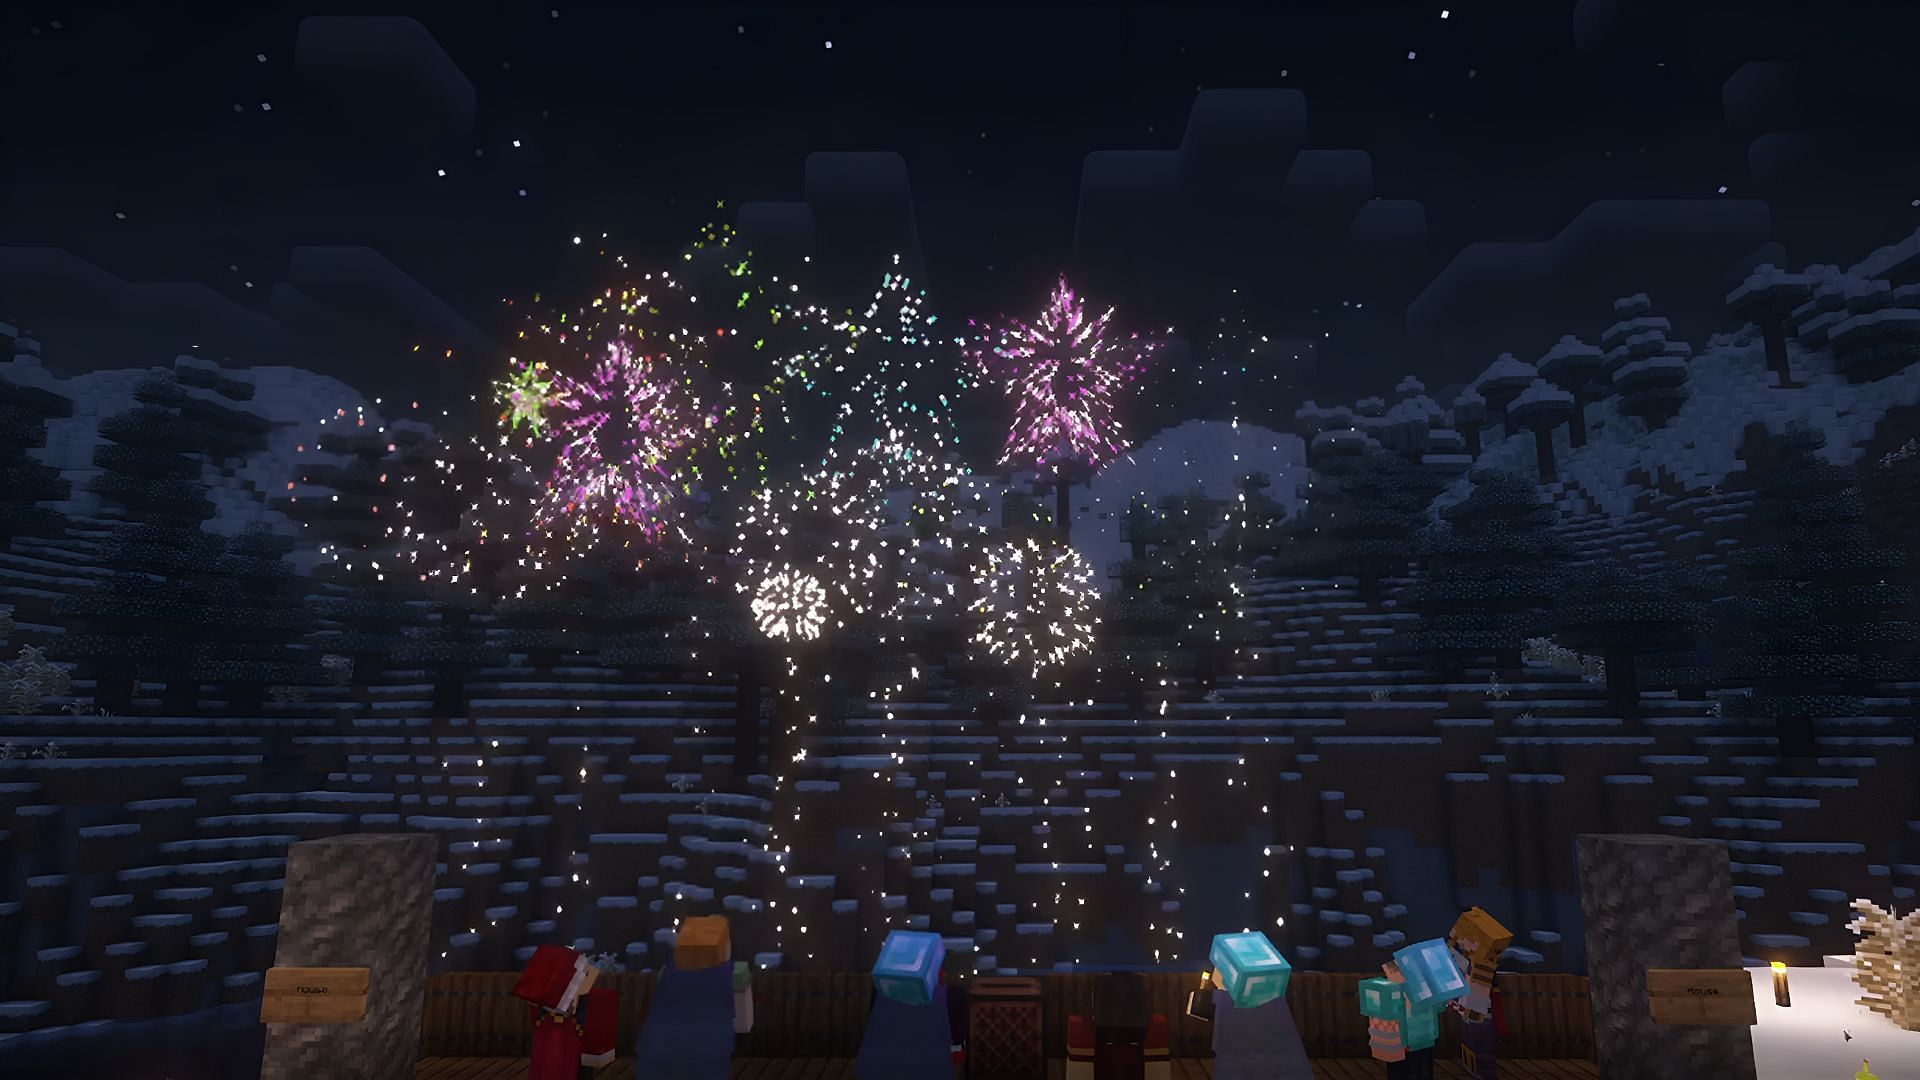 Minecraft players come together to watch a fireworks show created by Immabed.